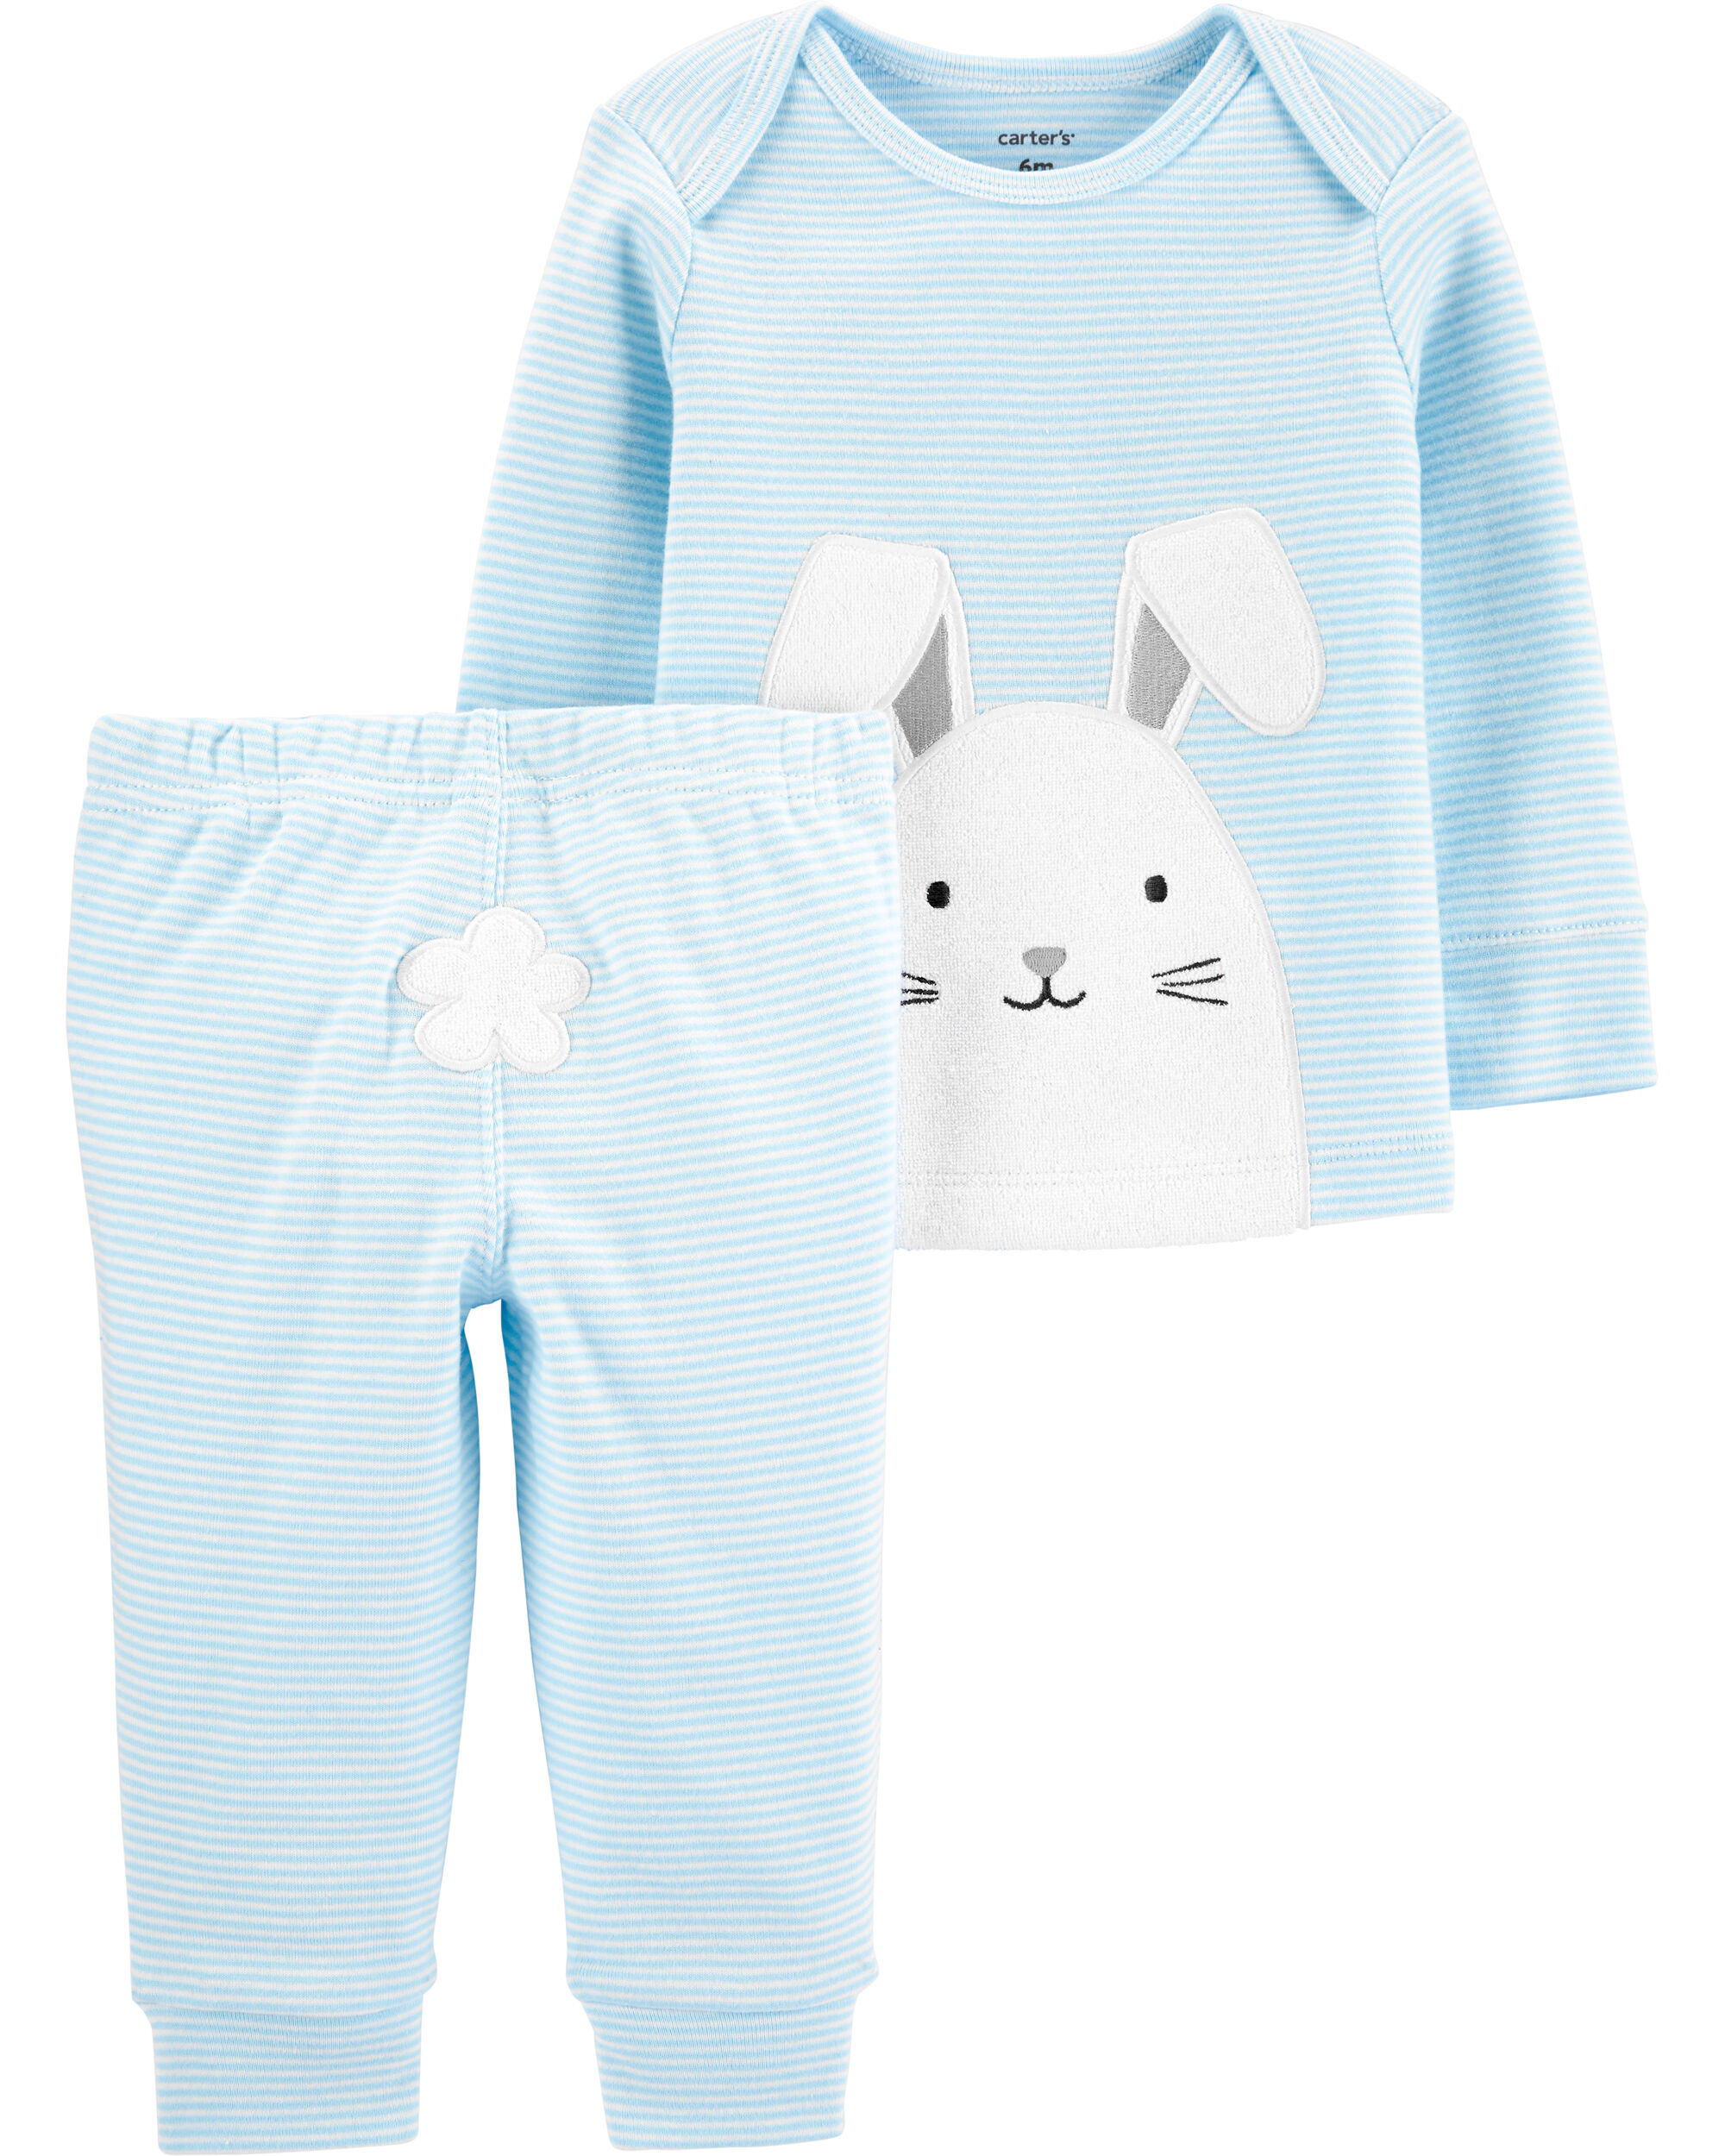 carter's easter dresses for toddlers